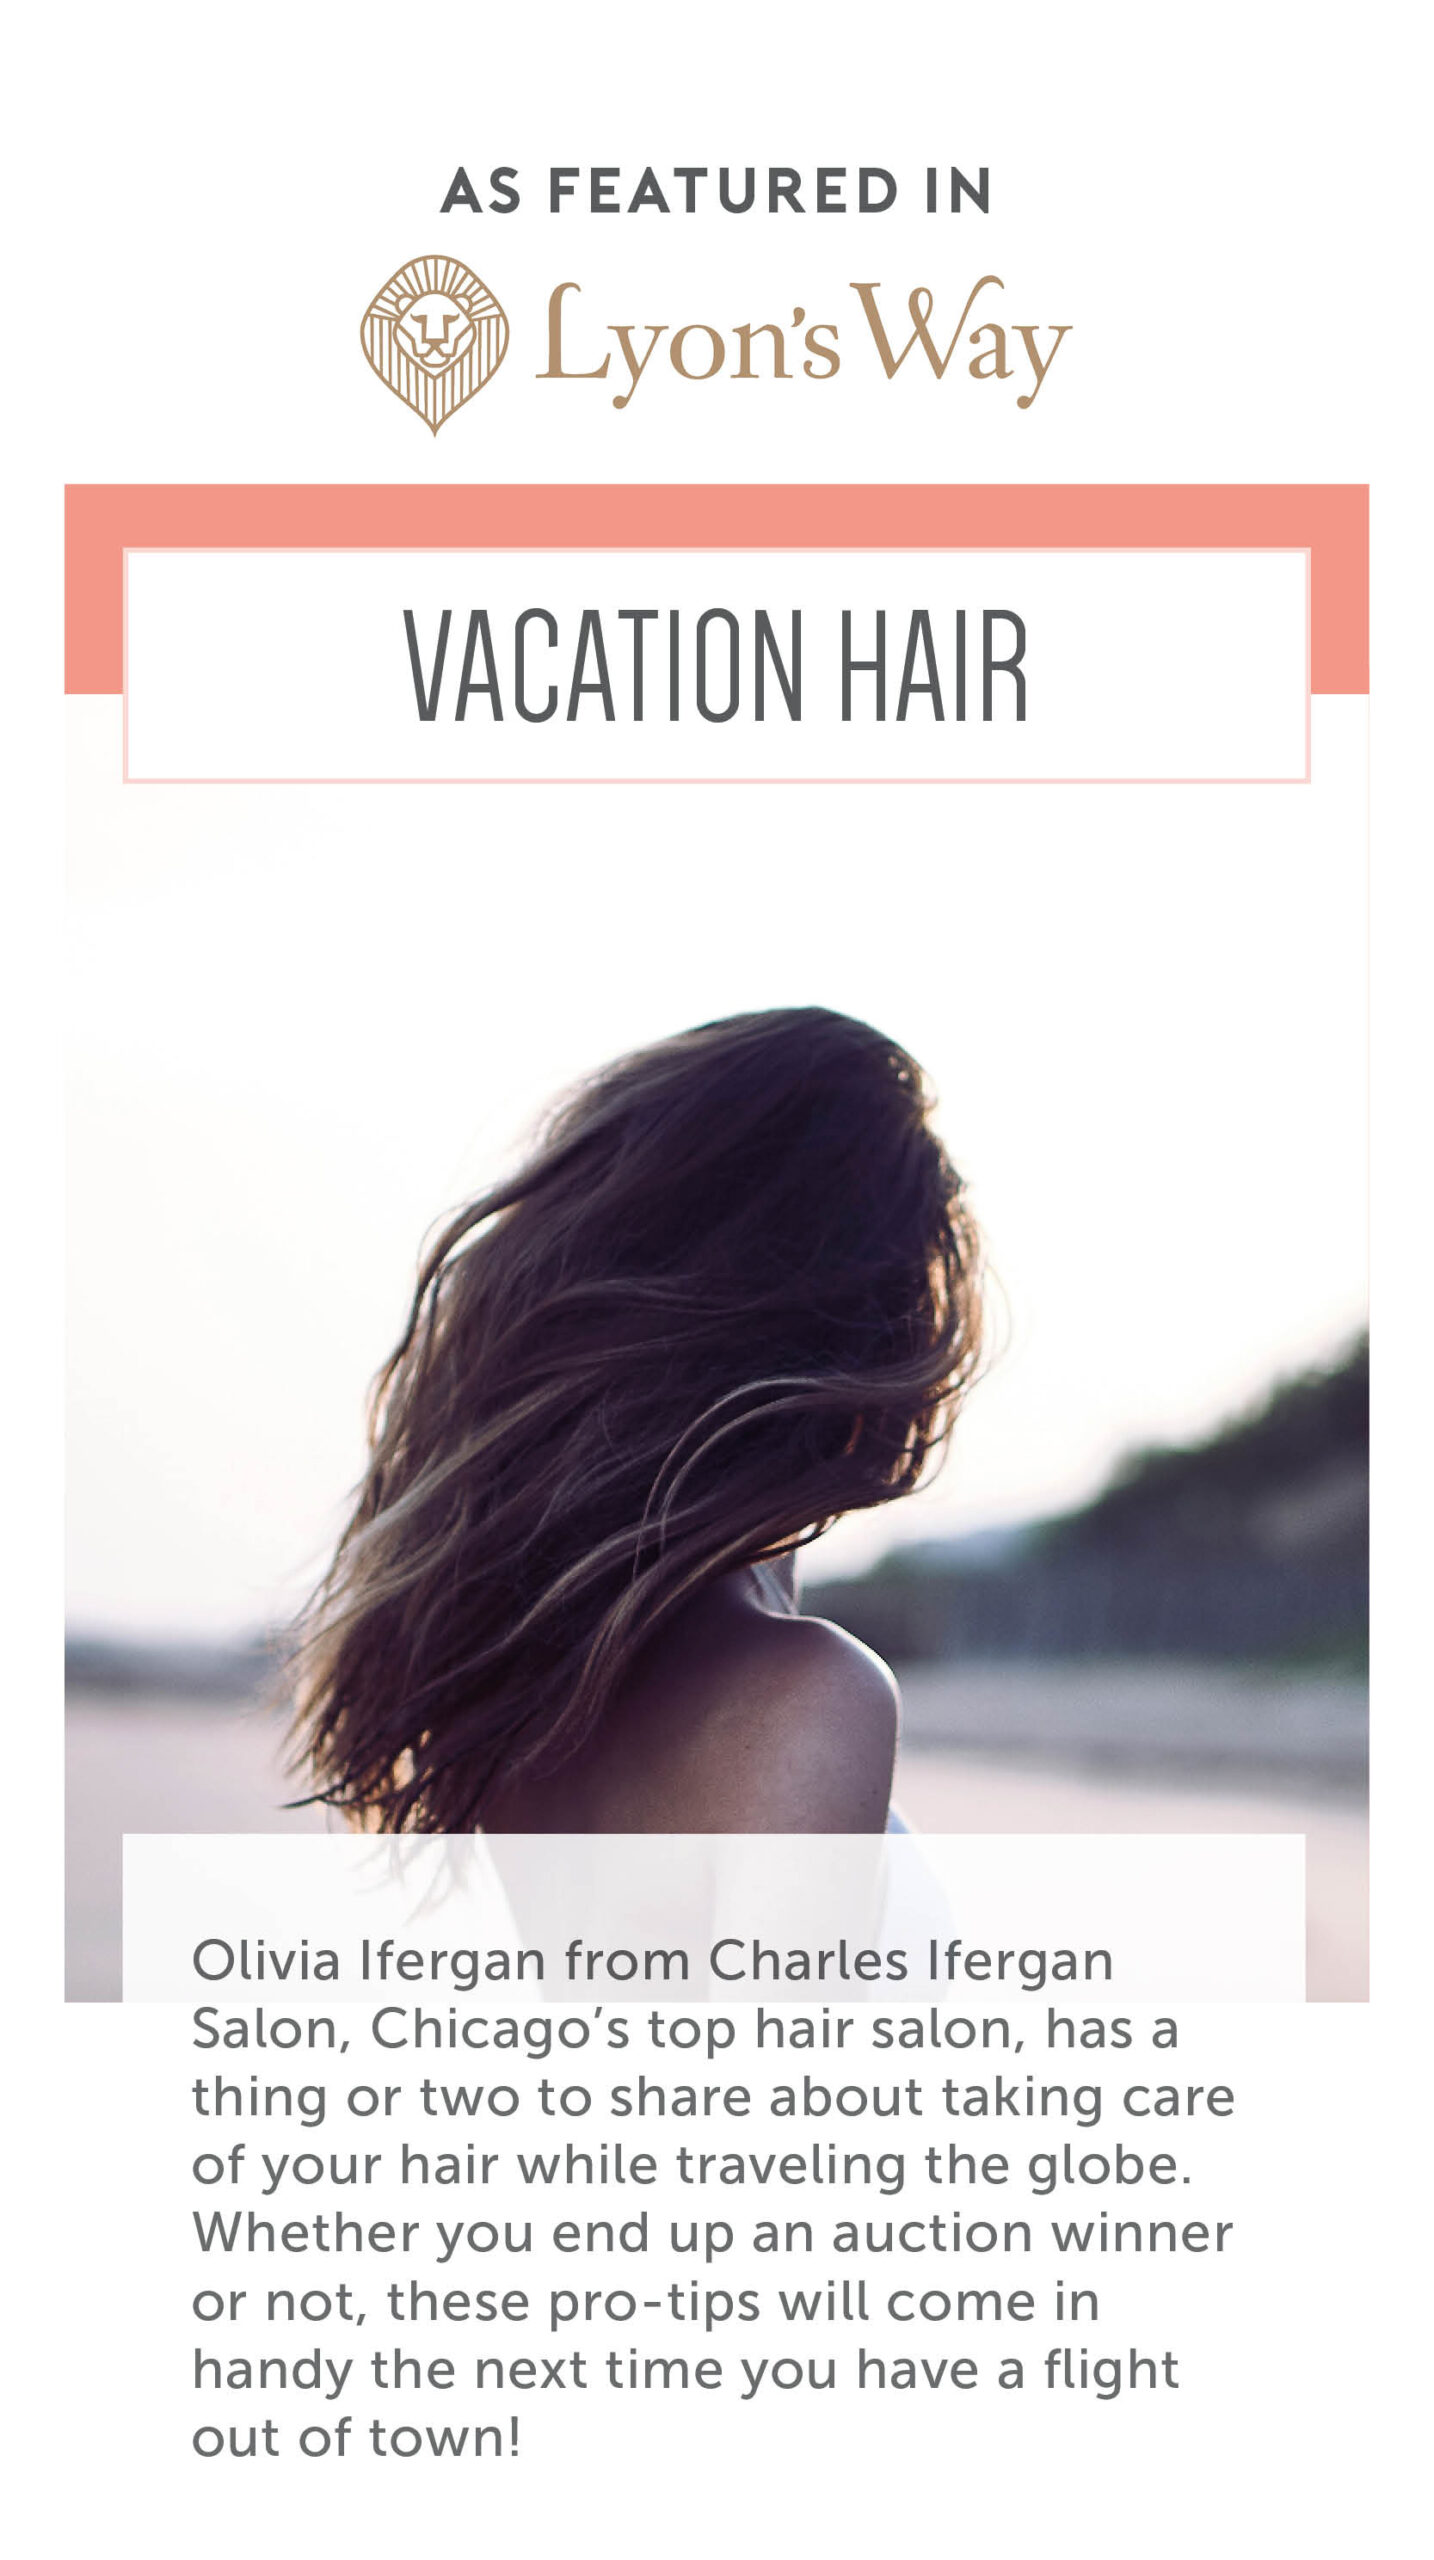 As featured in Lyon's Way. Vacation Hair. Olivia Ifergan from Charles Ifergan Salon, Chicago's top hair salon, has a thing or two to share about taking care of your hair while traveling the globe. Whether you end an an auction winner or not, these pro-tips will come in handy the next time you have a flight out of town! 